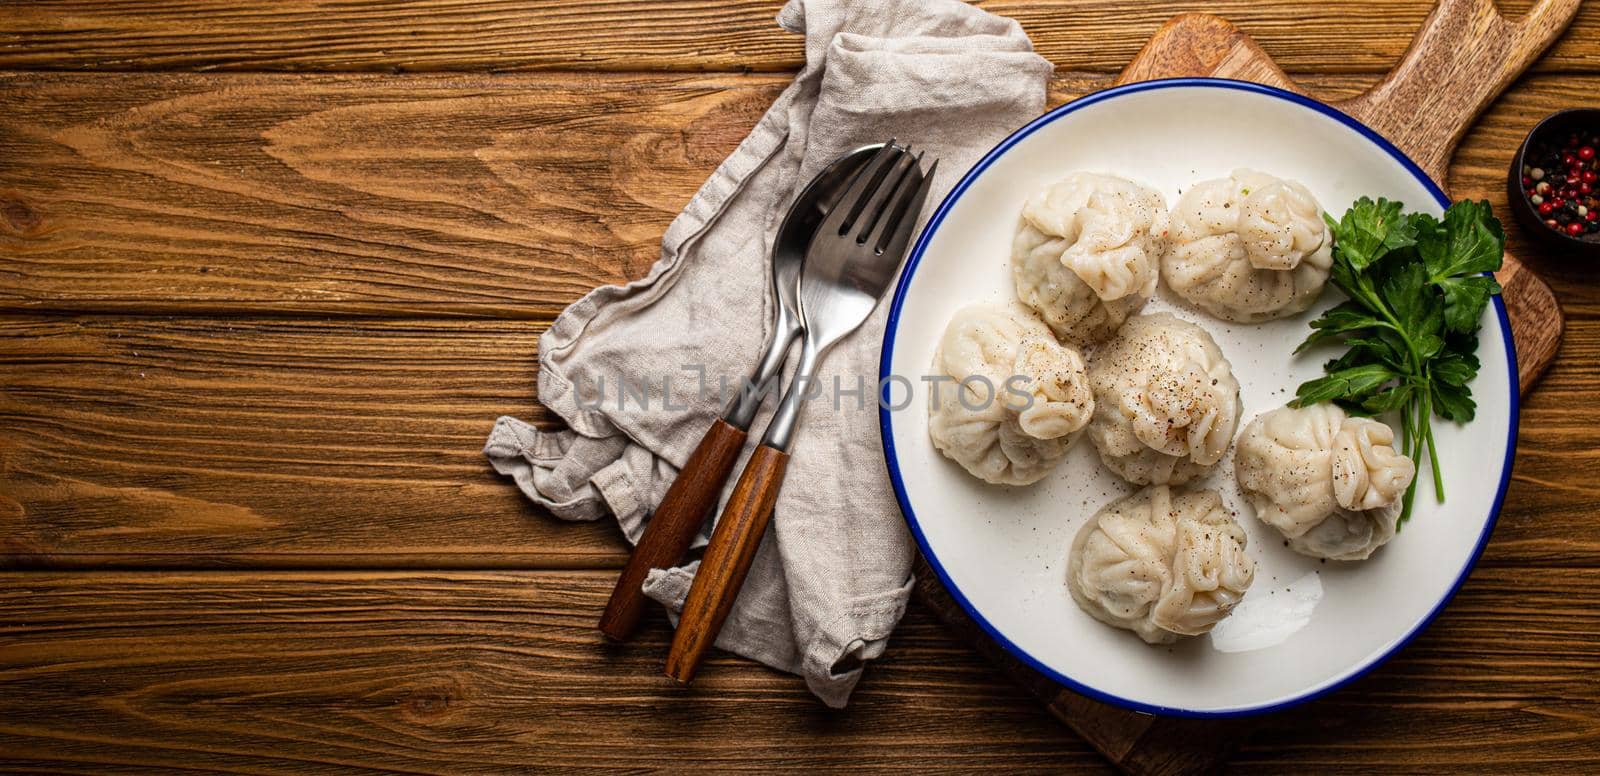 Khinkali, traditional dish of Georgian Caucasian cuisine, dumplings filled with ground meat on white plate with herbs on wooden rustic background table top view space for text.